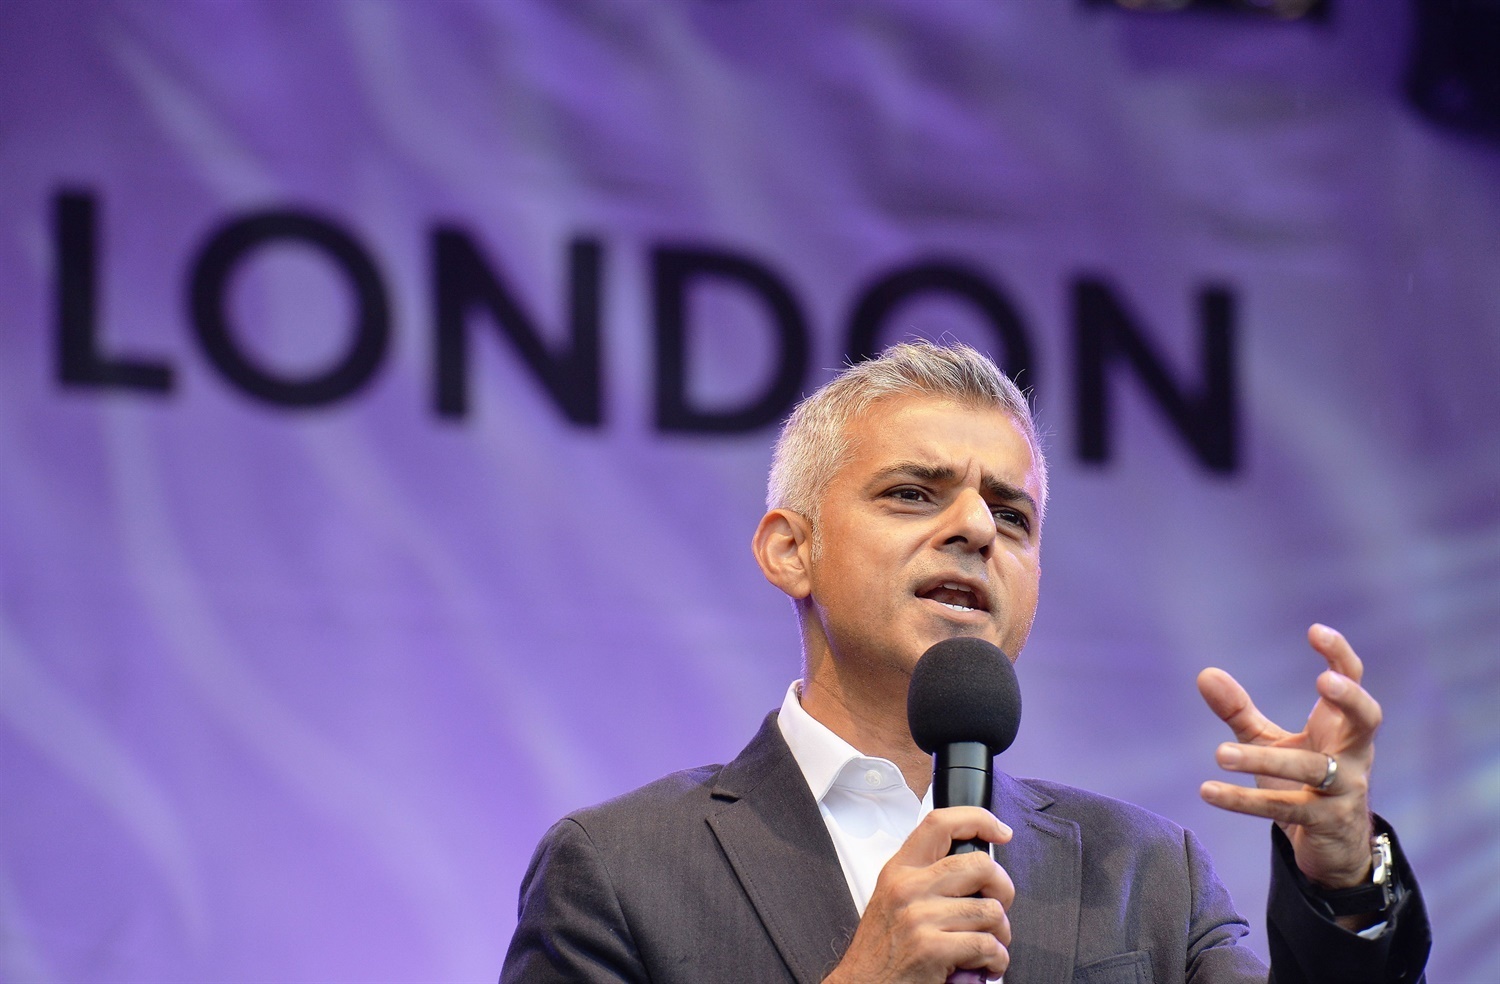 Business leaders urge Khan to appoint ‘freight commissioner’ for London